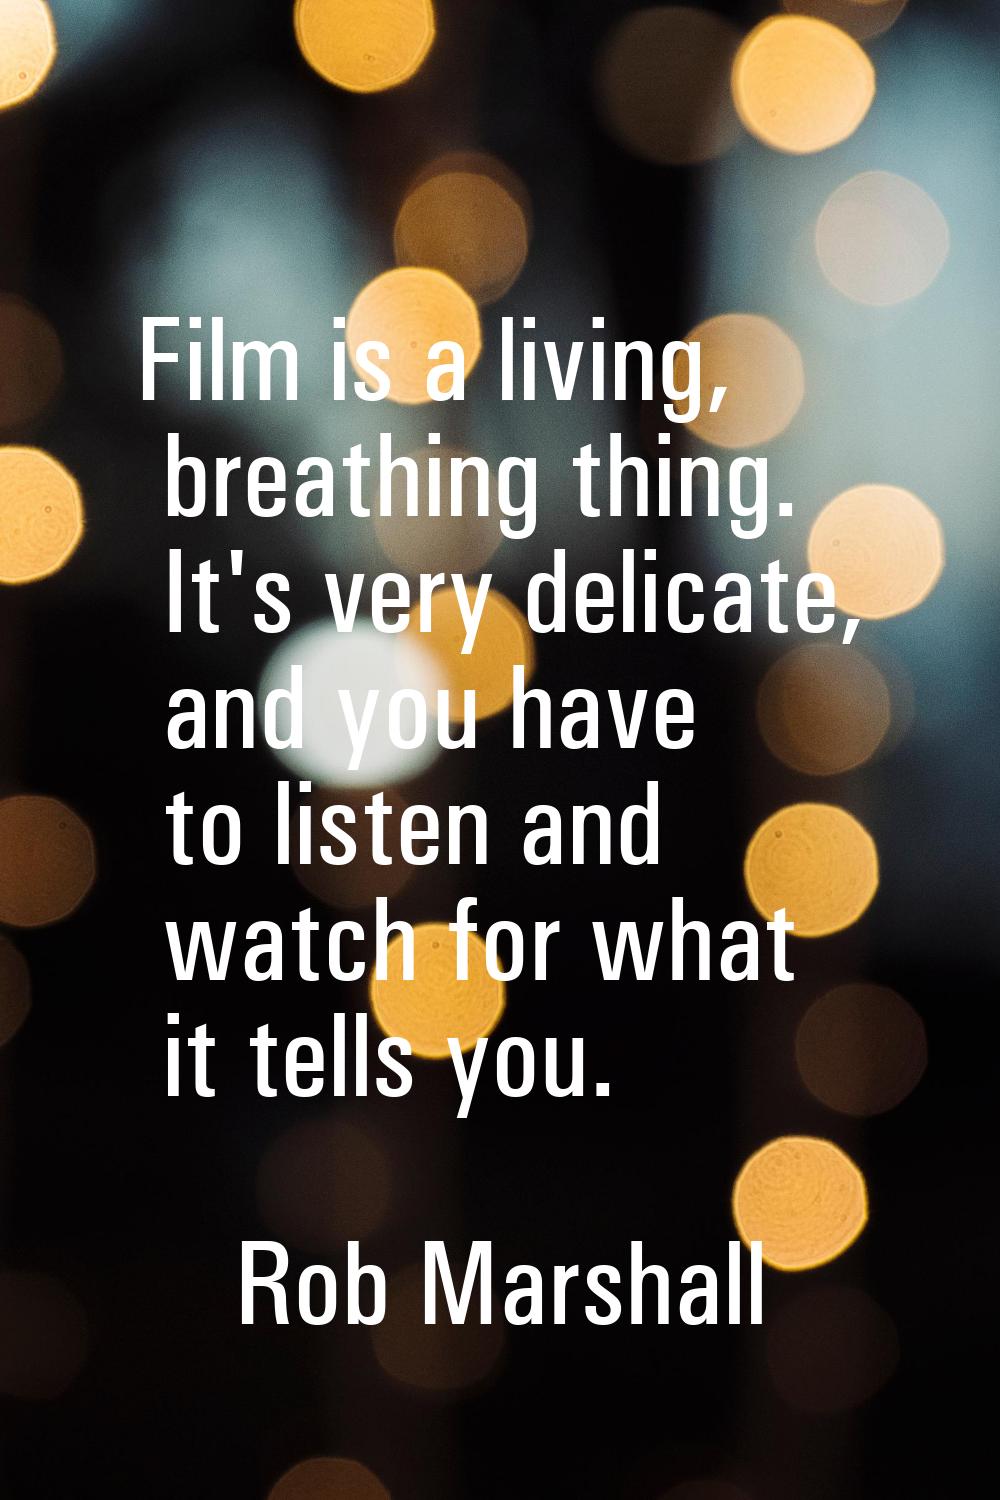 Film is a living, breathing thing. It's very delicate, and you have to listen and watch for what it